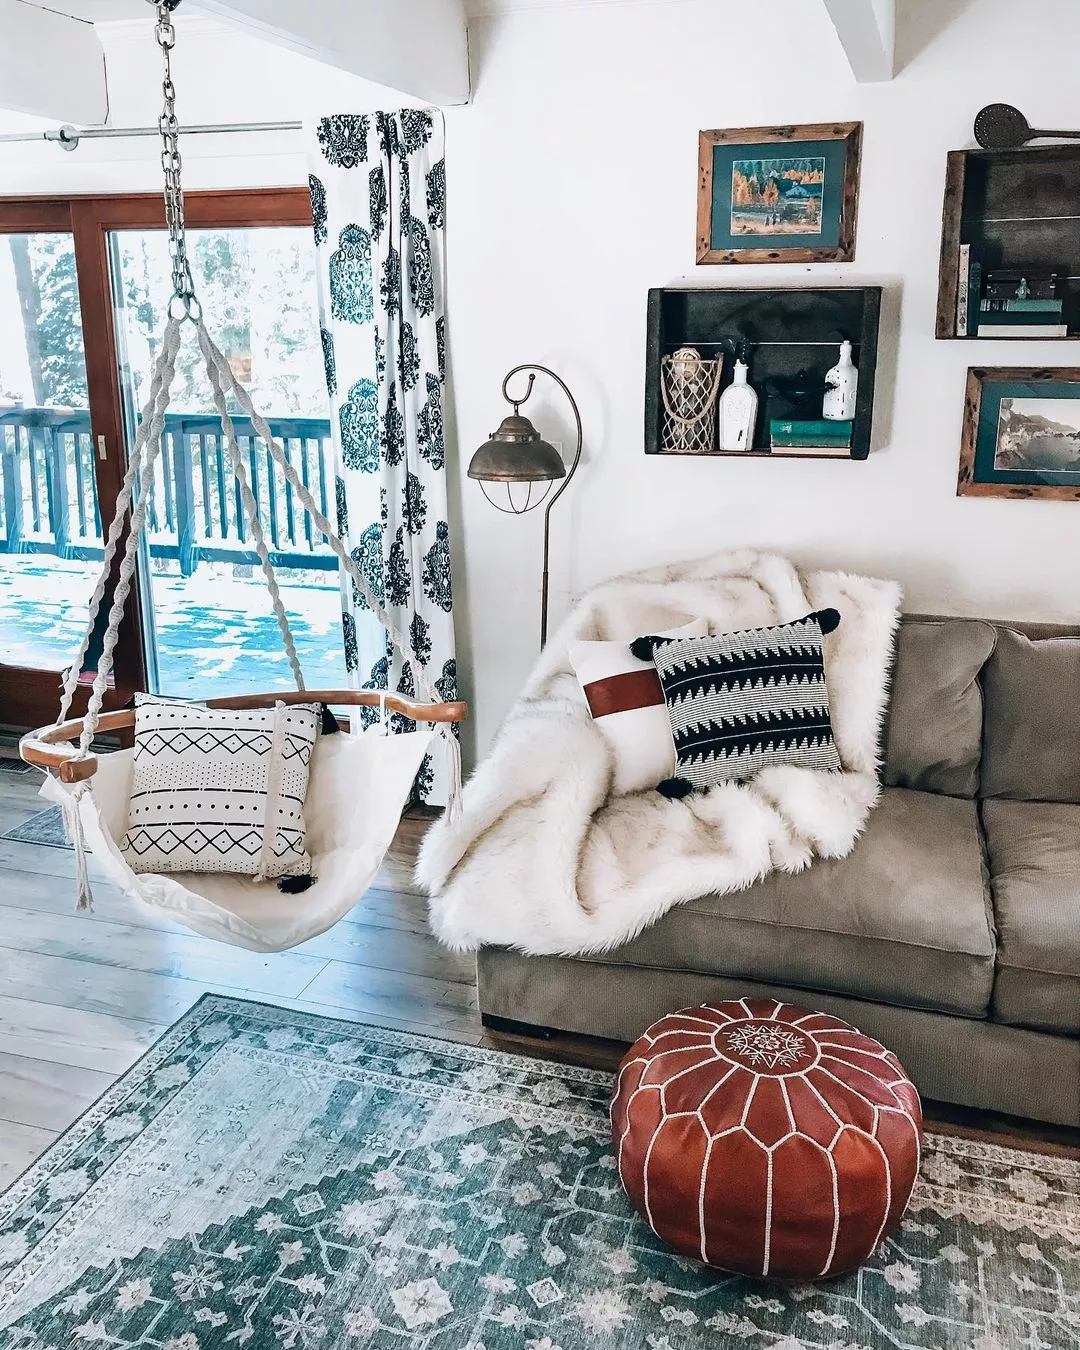 https://www.extraspace.com/blog/wp-content/uploads/2021/02/How-to-Decorate-in-Bohemian-Style-Chill-Out-in-a-Hanging-Chair.jpg.webp